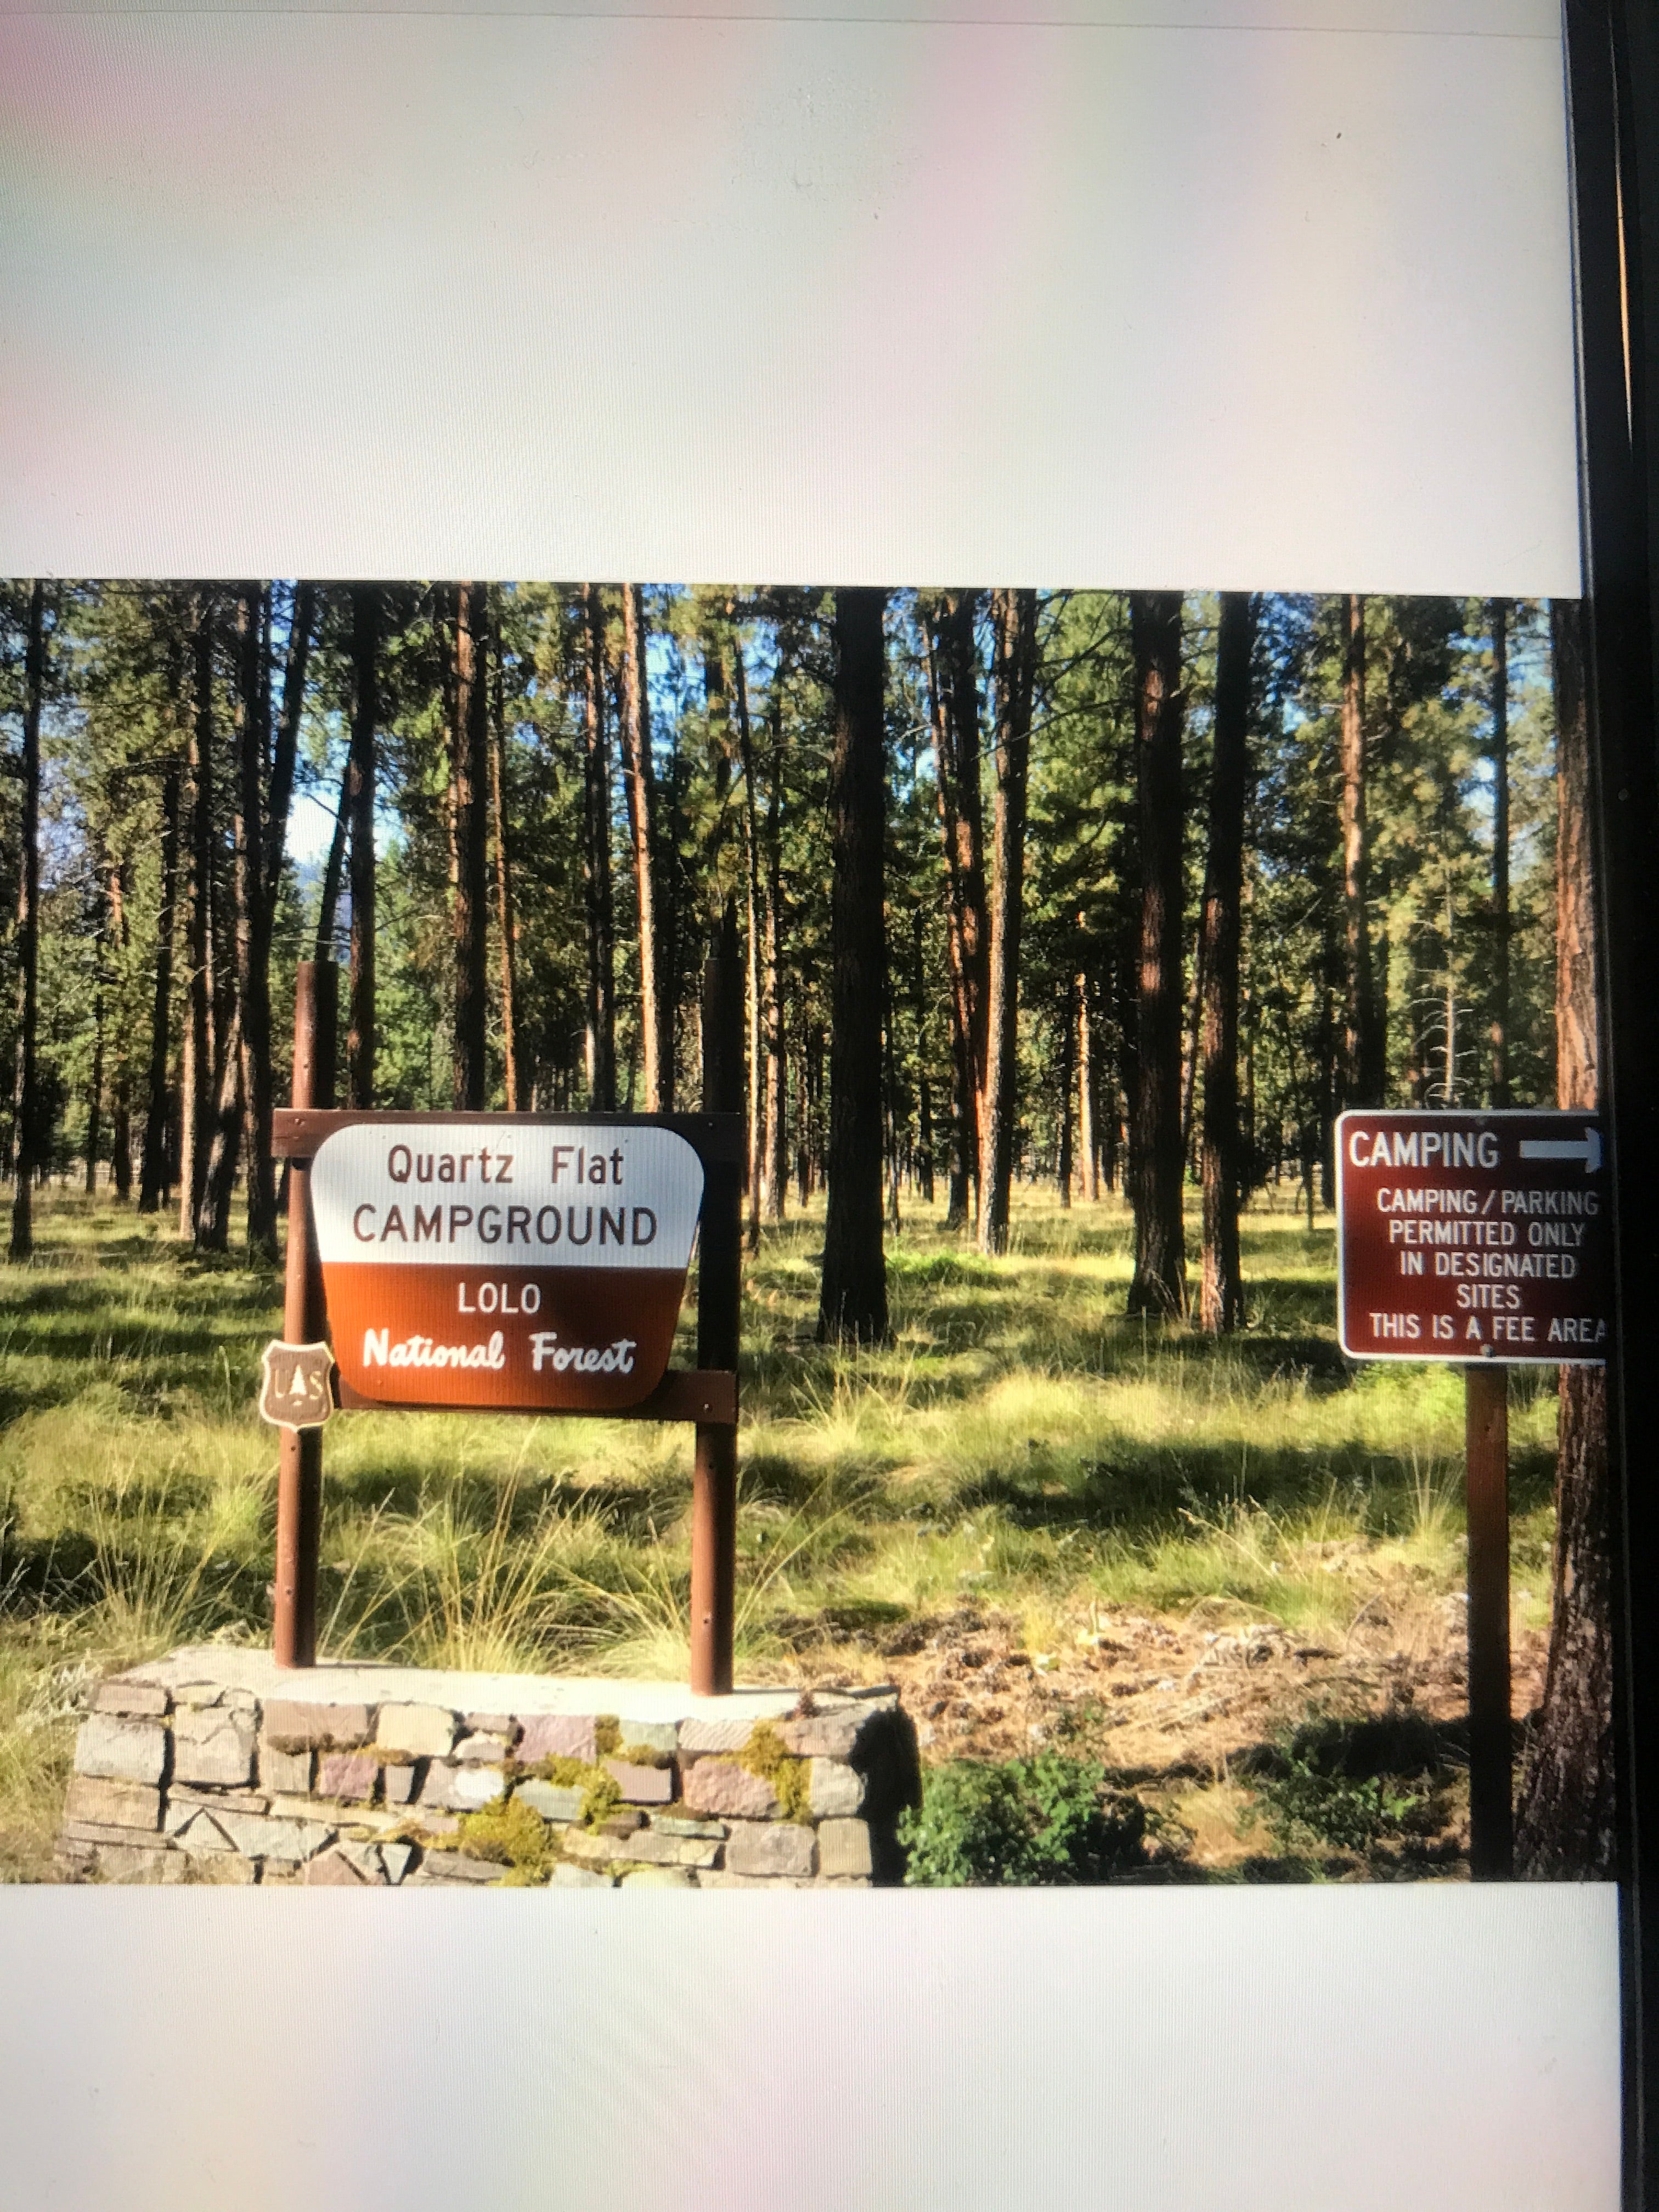 Camper submitted image from Quartz Flat Campground - 4